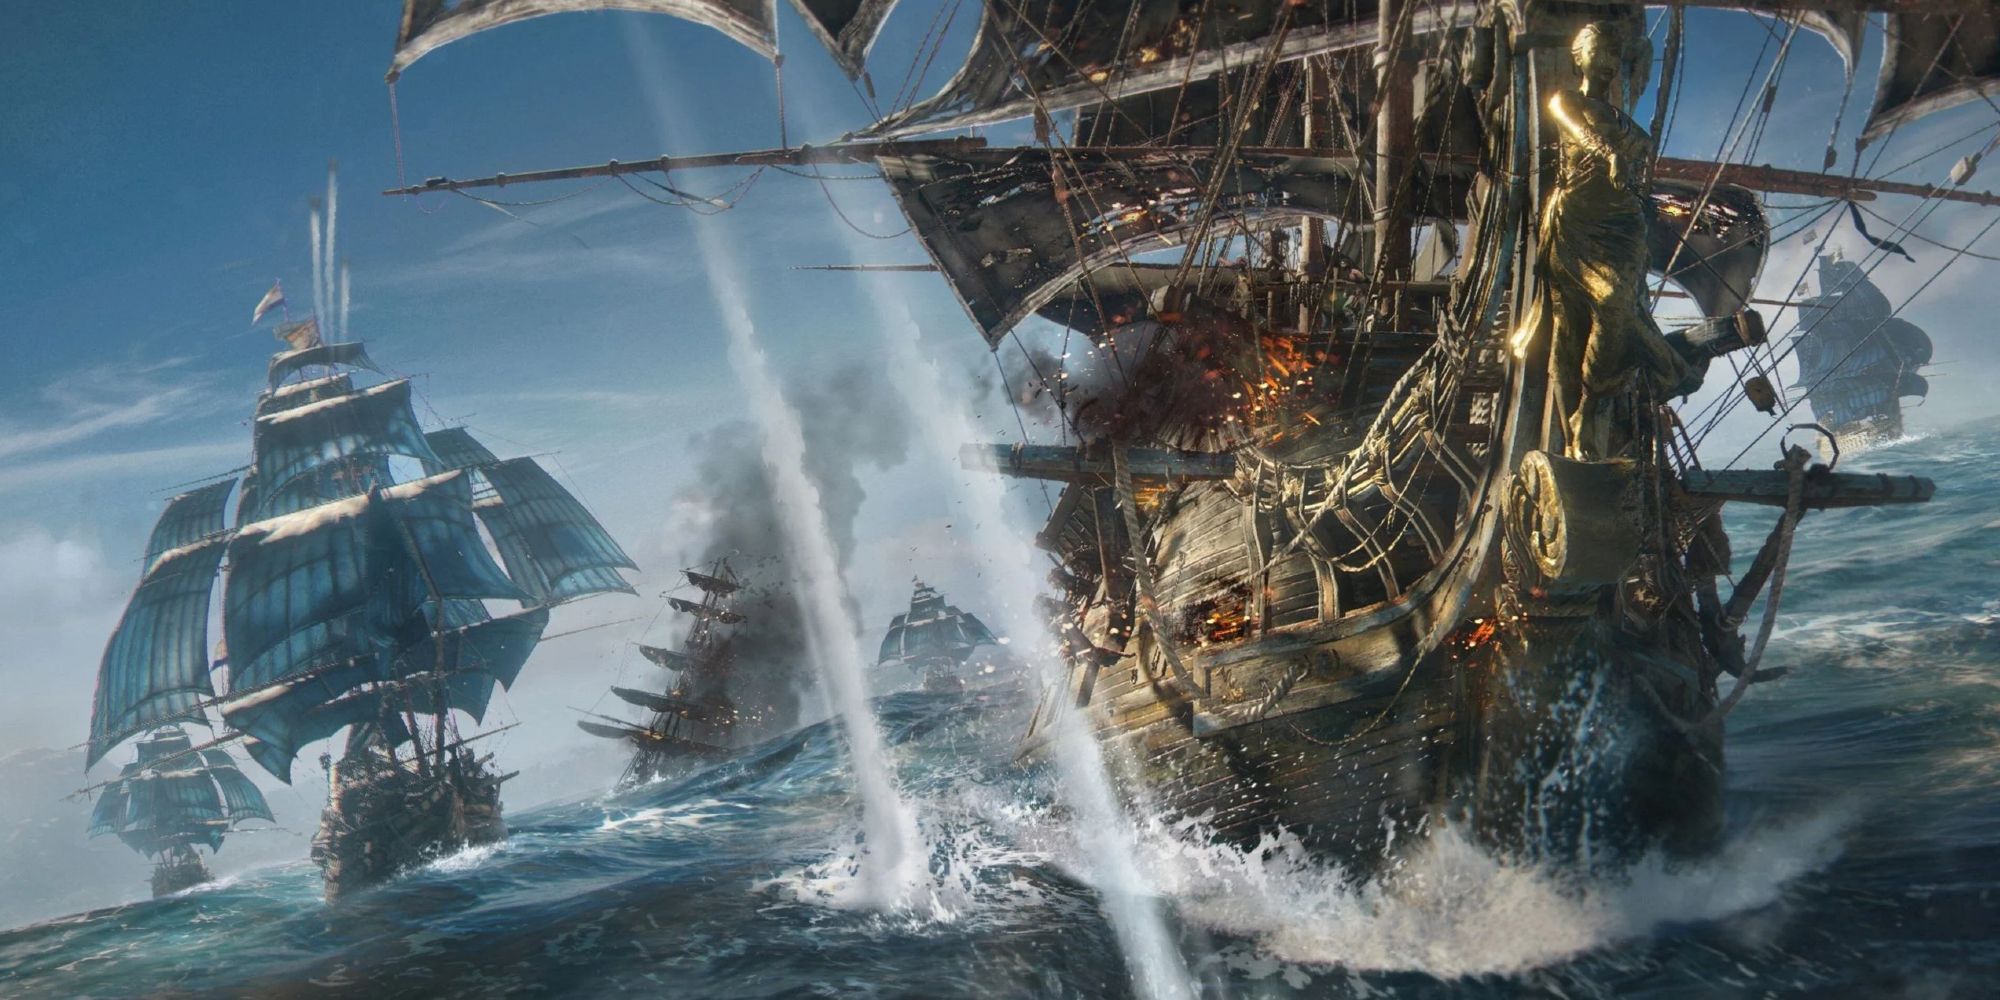 Skull and Bones' is still alive, will apparently have a closed beta in  August